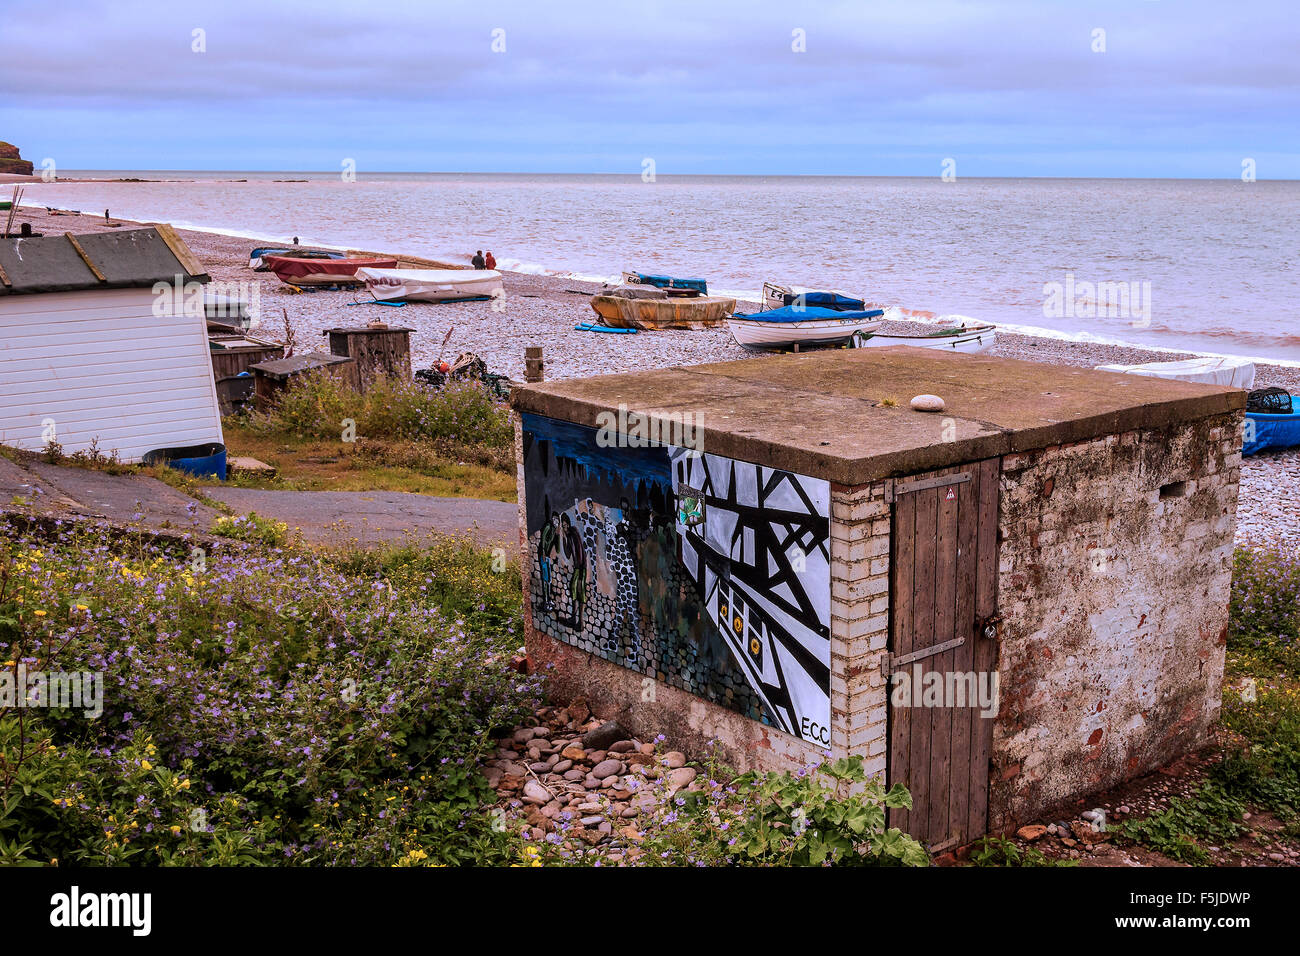 A Mural On A Boathouse Budleigh Salterton East Devon UK Stock Photo